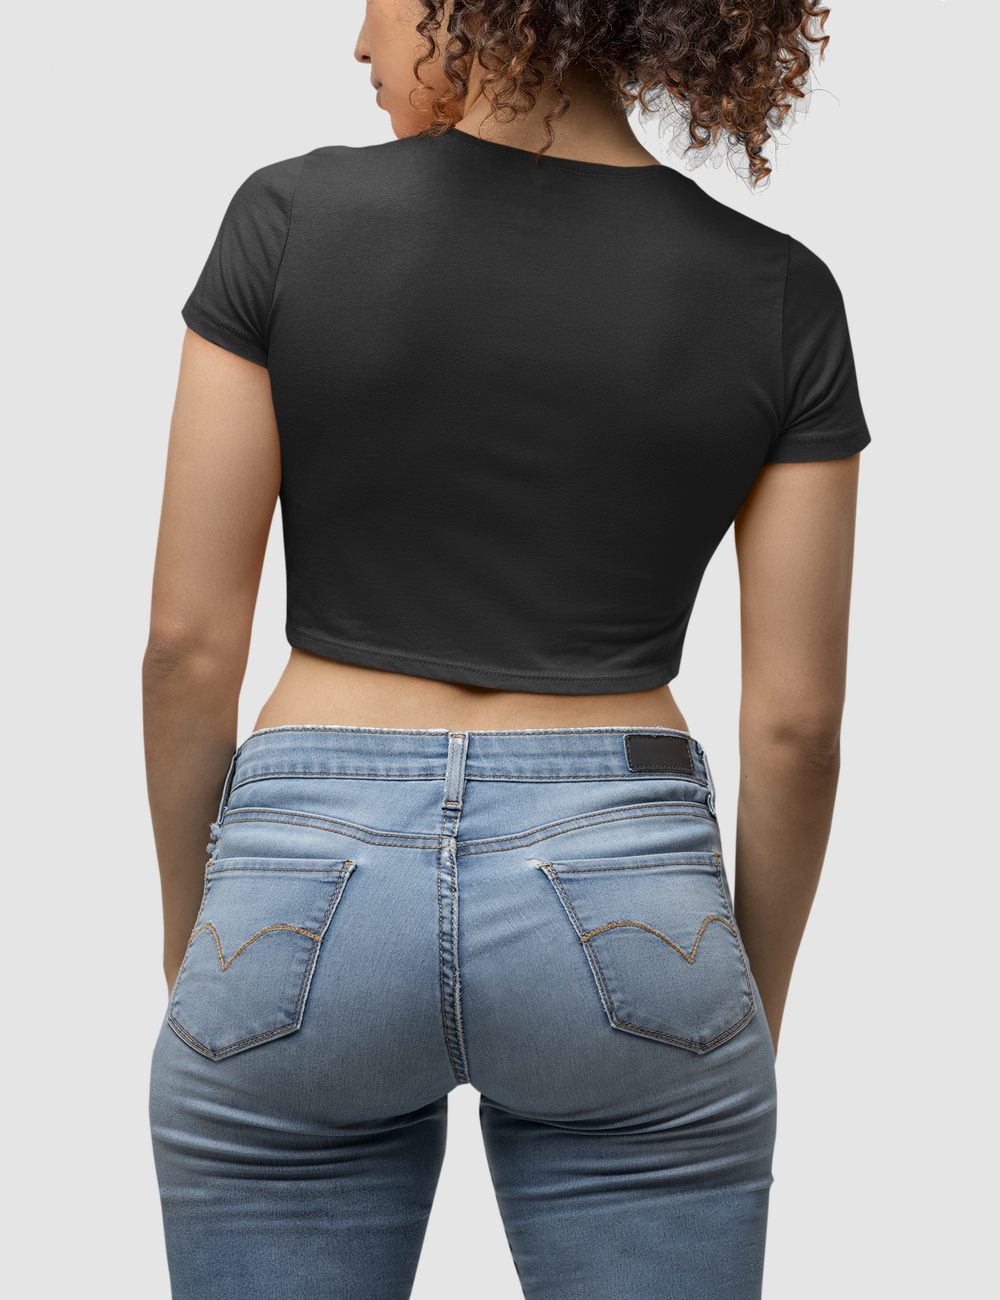 Bad Girls Are Just Way More Fun | Women's Fitted Crop Top T-Shirt OniTakai